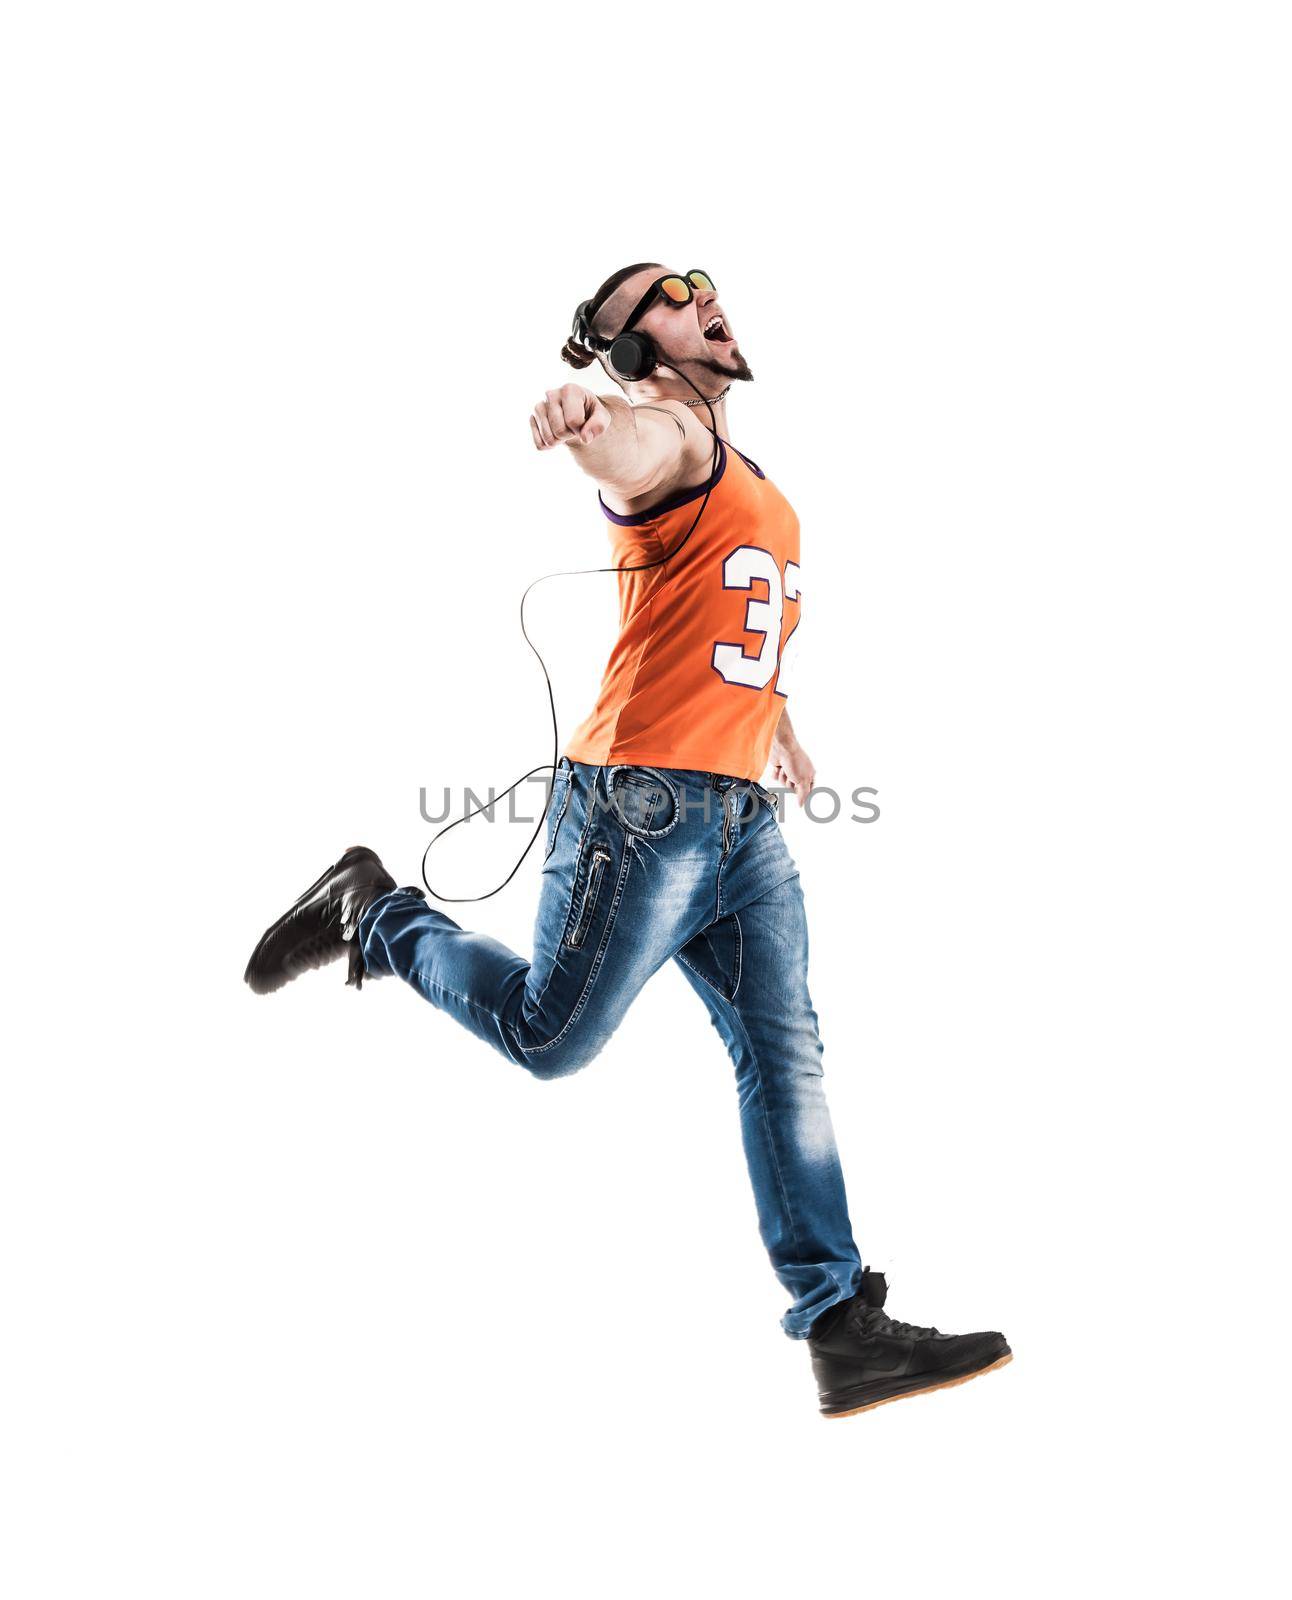 charming guy - rapper in headphones takes the dance break.photo on a white background and has an empty space for your text